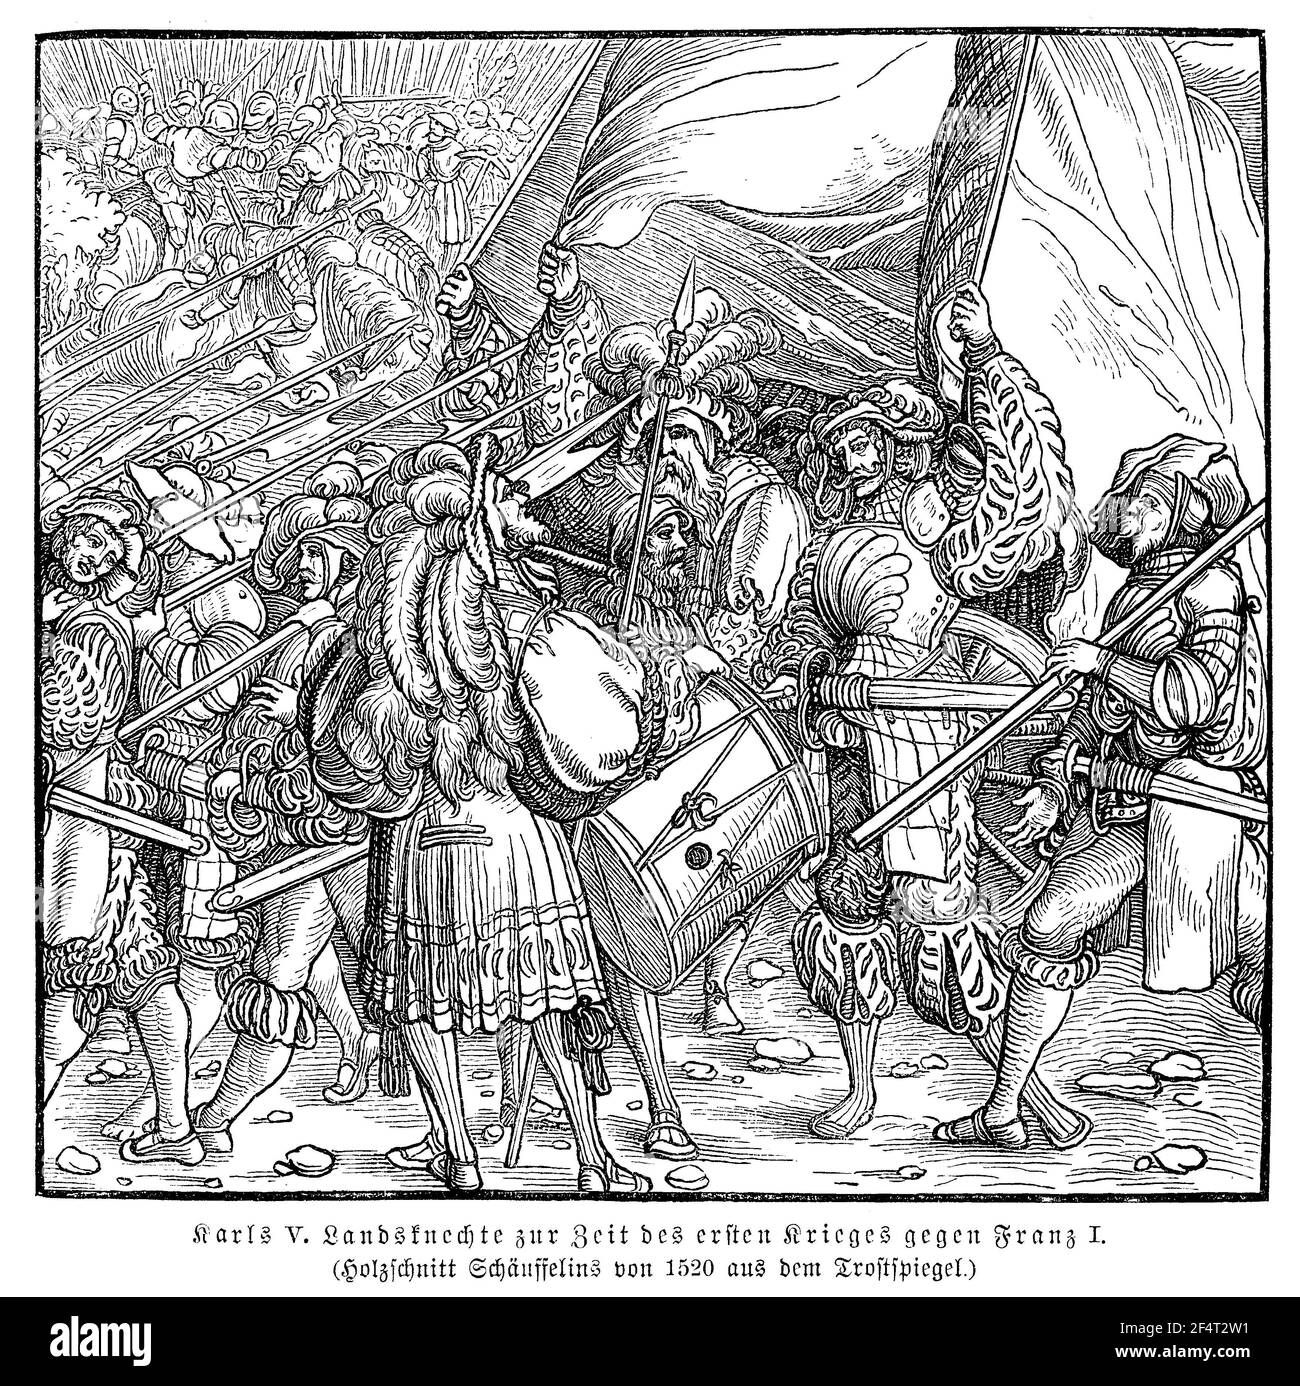 Lansquenets foot-soldiers of Holy Roman Emperor Charles V on the battlefield of the Italian wars against the French king Francis I, engraving by Hans Leonhard Schaeufelein, 1520 Stock Photo